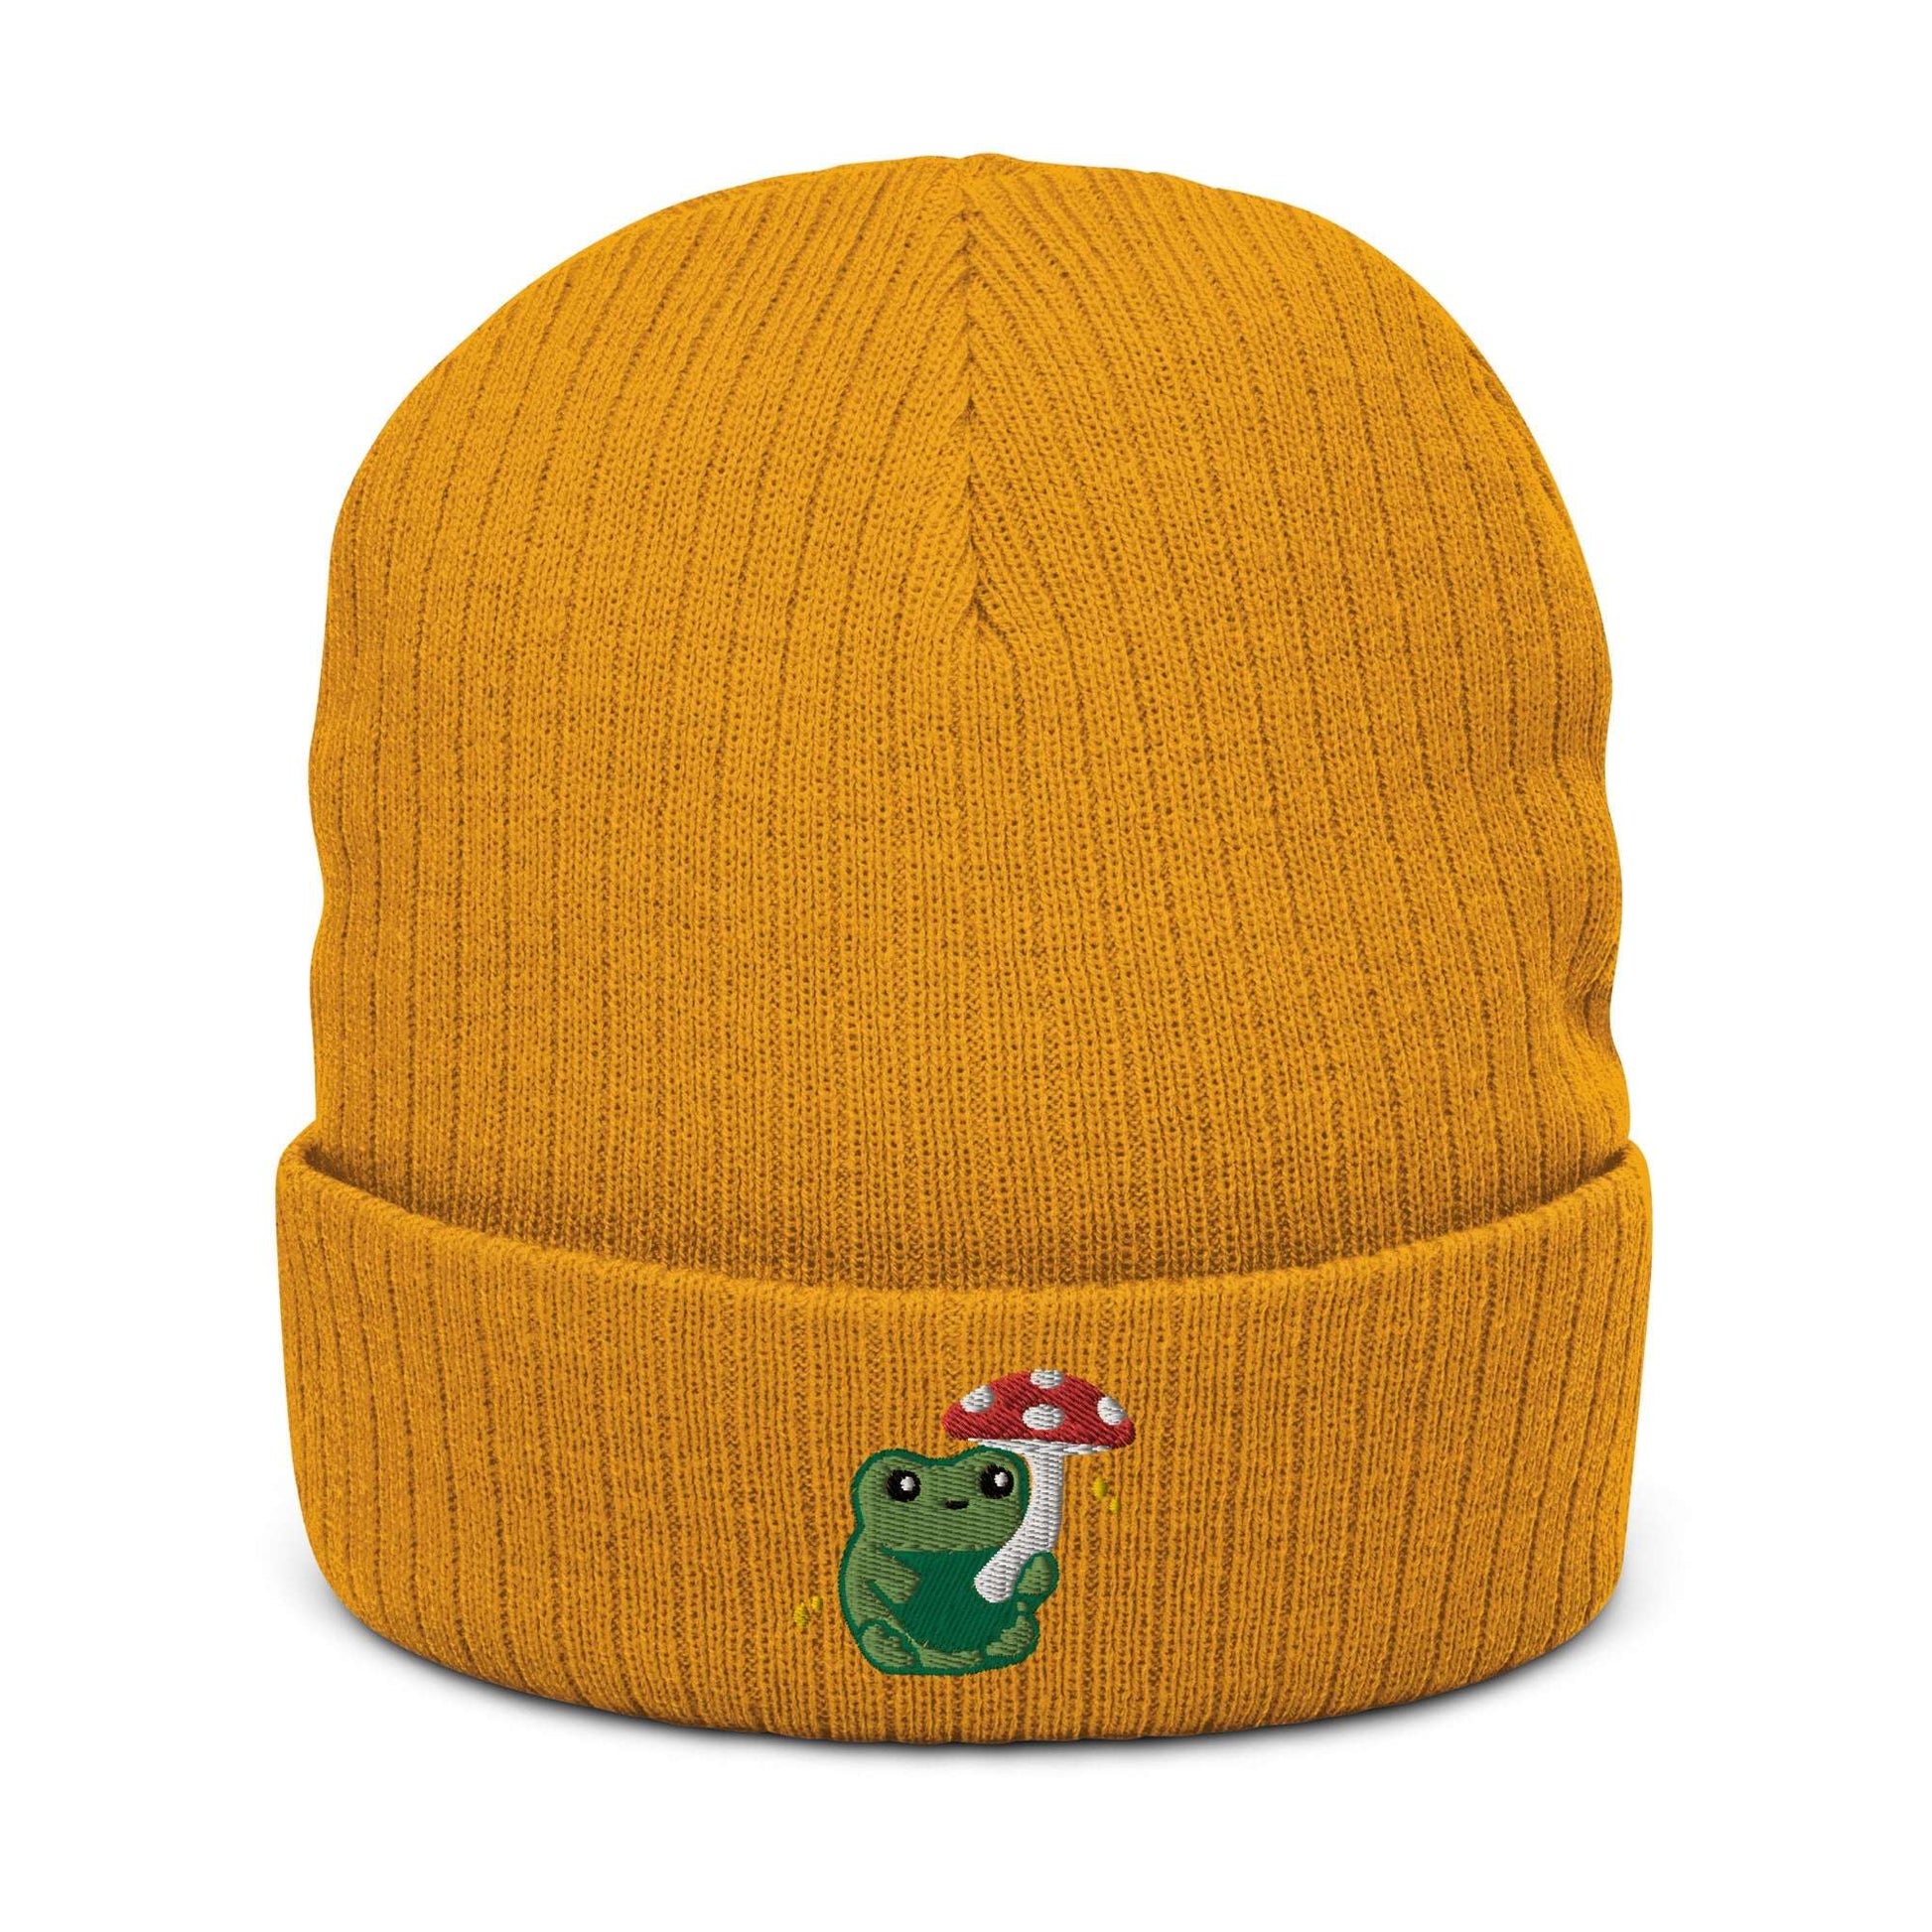 Ribbed Knit Beanie with Cute Embroidered Frog holding a Mushroom Umbrella: Mustard